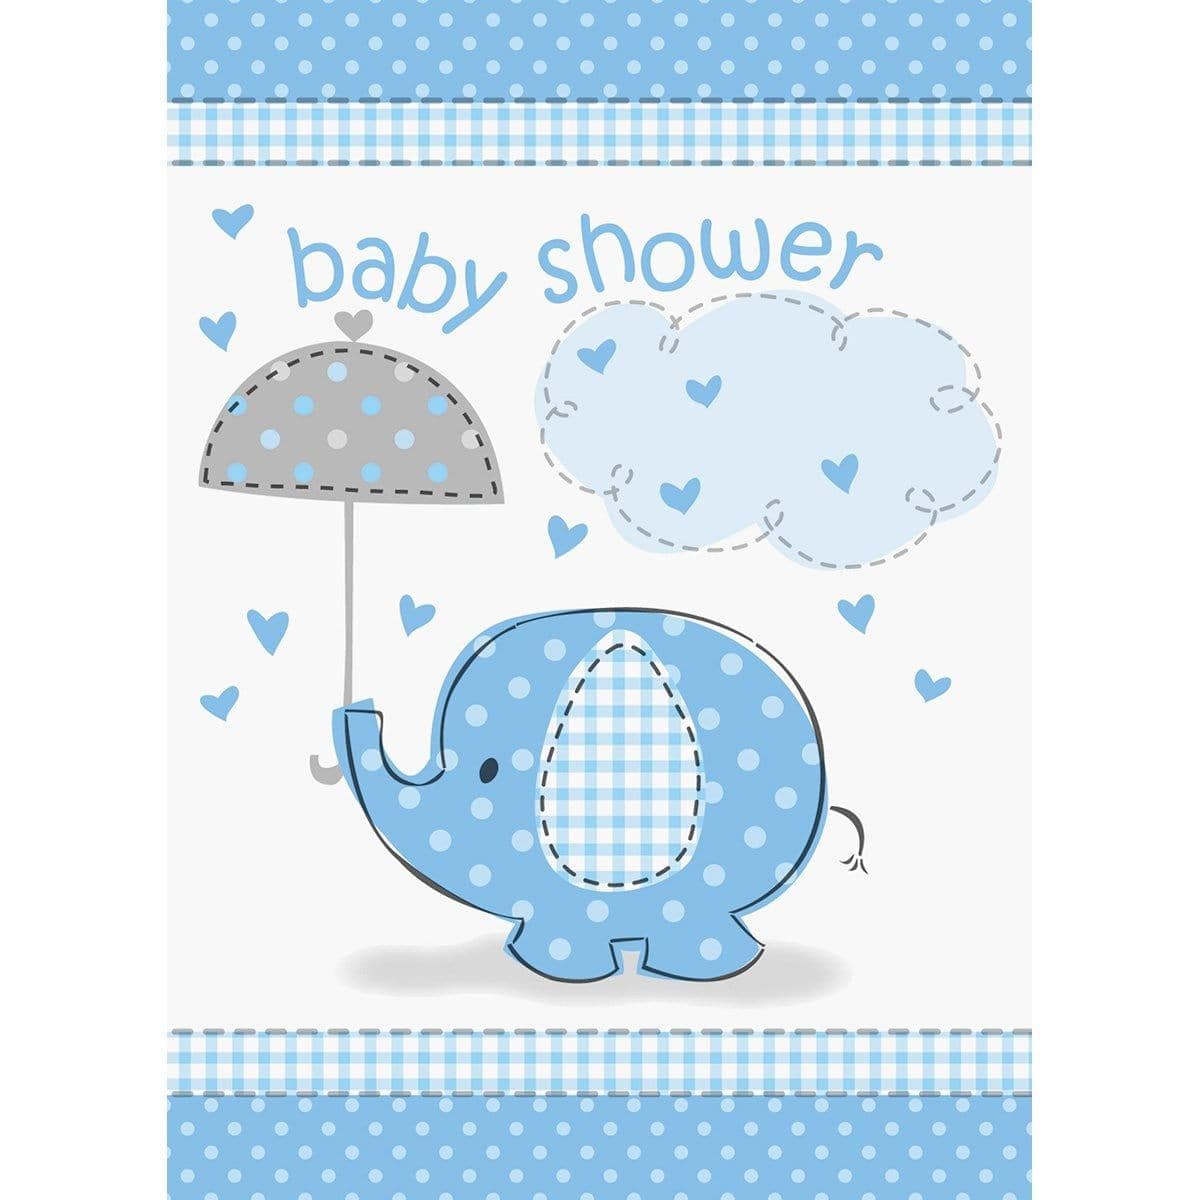 Buy Baby Shower Umbrellaphants Blue invitations, 8 per package sold at Party Expert